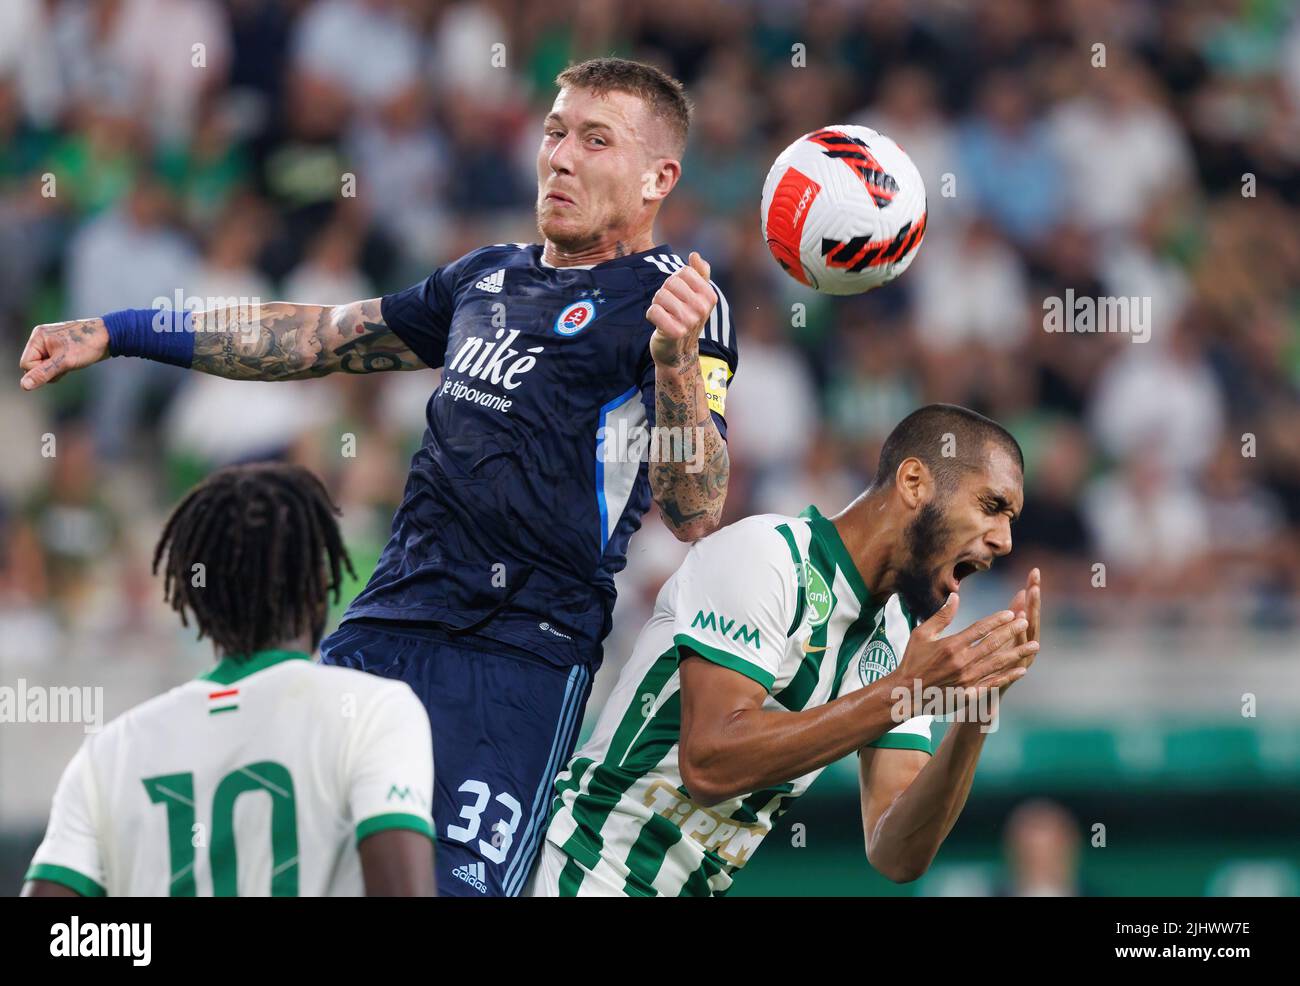 BUDAPEST, HUNGARY - JULY 20: Juraj Kucka of SK Slovan Bratislava battles for the ball in the air with Aissa Laidouni of Ferencvarosi TC during the UEFA Champions League Second Qualifying Round First Leg match between Ferencvarosi TC and SK Slovan Bratislava at Ferencvaros Stadium on July 20, 2022 in Budapest, Hungary. Stock Photo